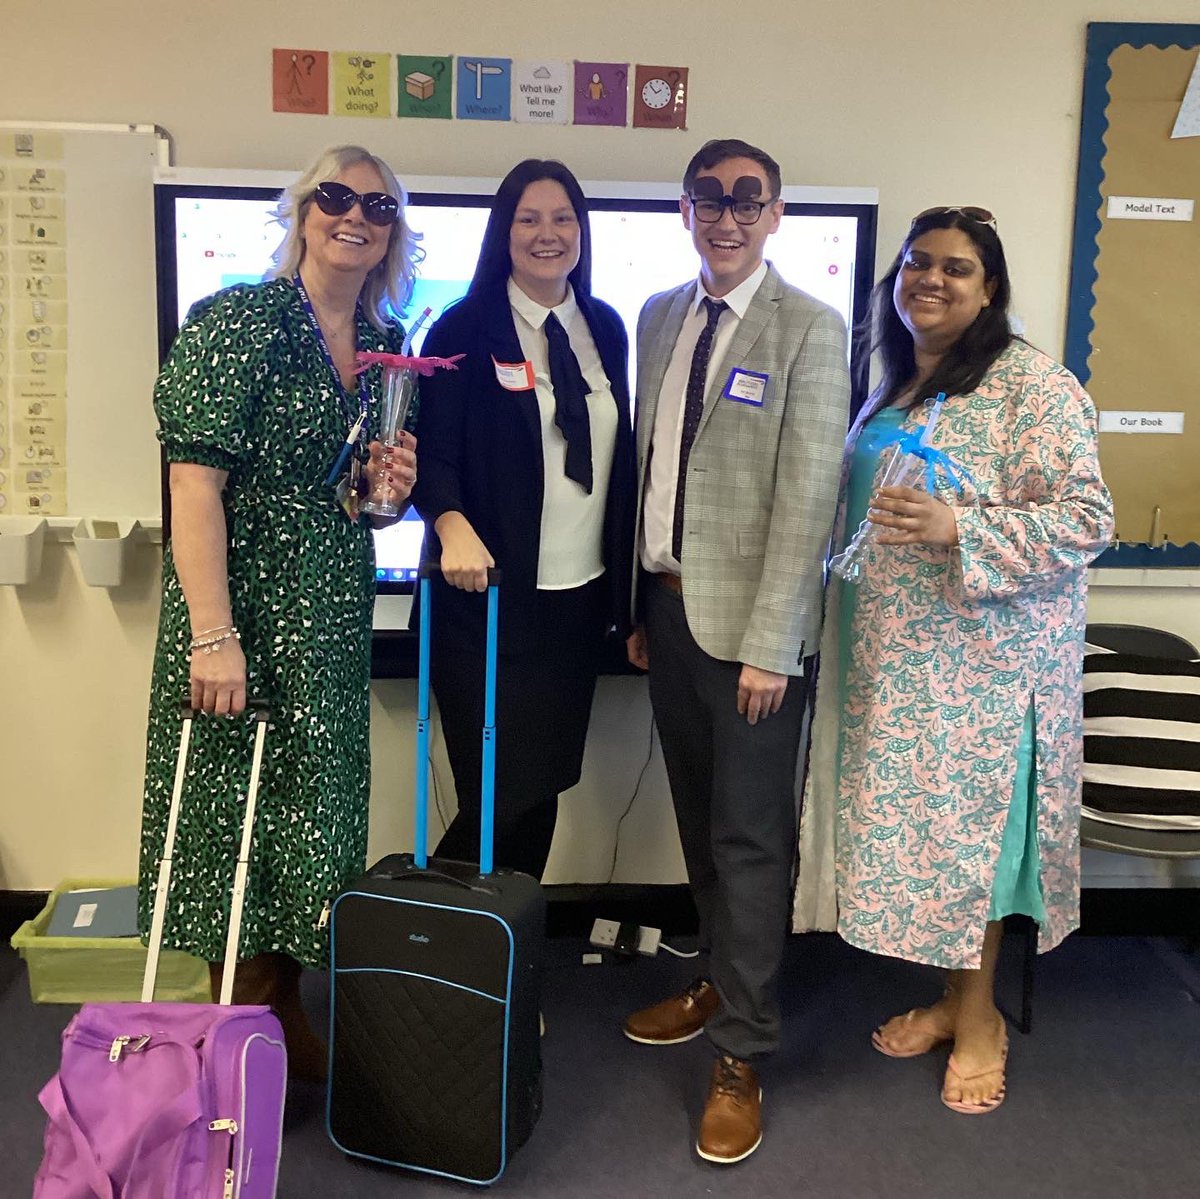 At the beginning of term, Year 2 had their aviation stunning start to launch their new project topic🛩️ “The children came dressed in summer holiday clothes, made their boarding passes, and we had our very own WM flight experience complete with in-flight snacks and entertainment.”